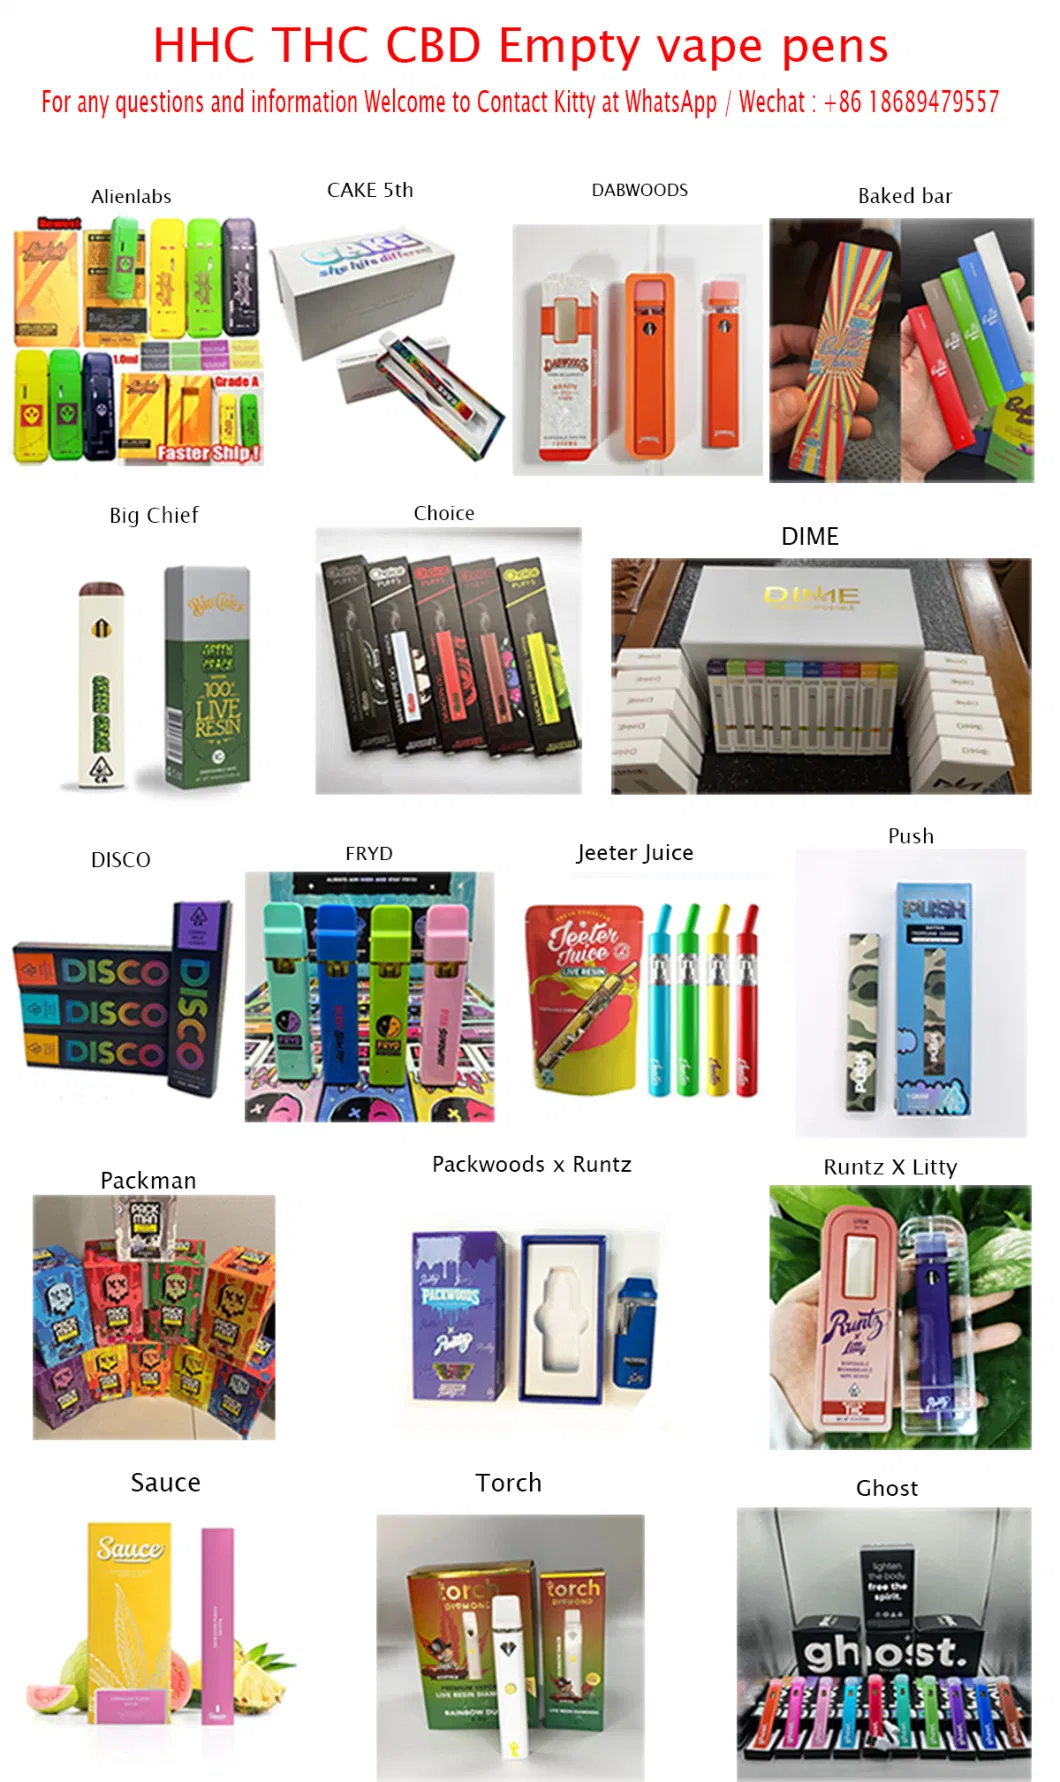 Factory Price New Packman 2ml Pre Heat Electronic Cigarette D8 Delta 11 for Thick Oil Disposable Lit Pod Custom Empty Vape Pen with Packaging